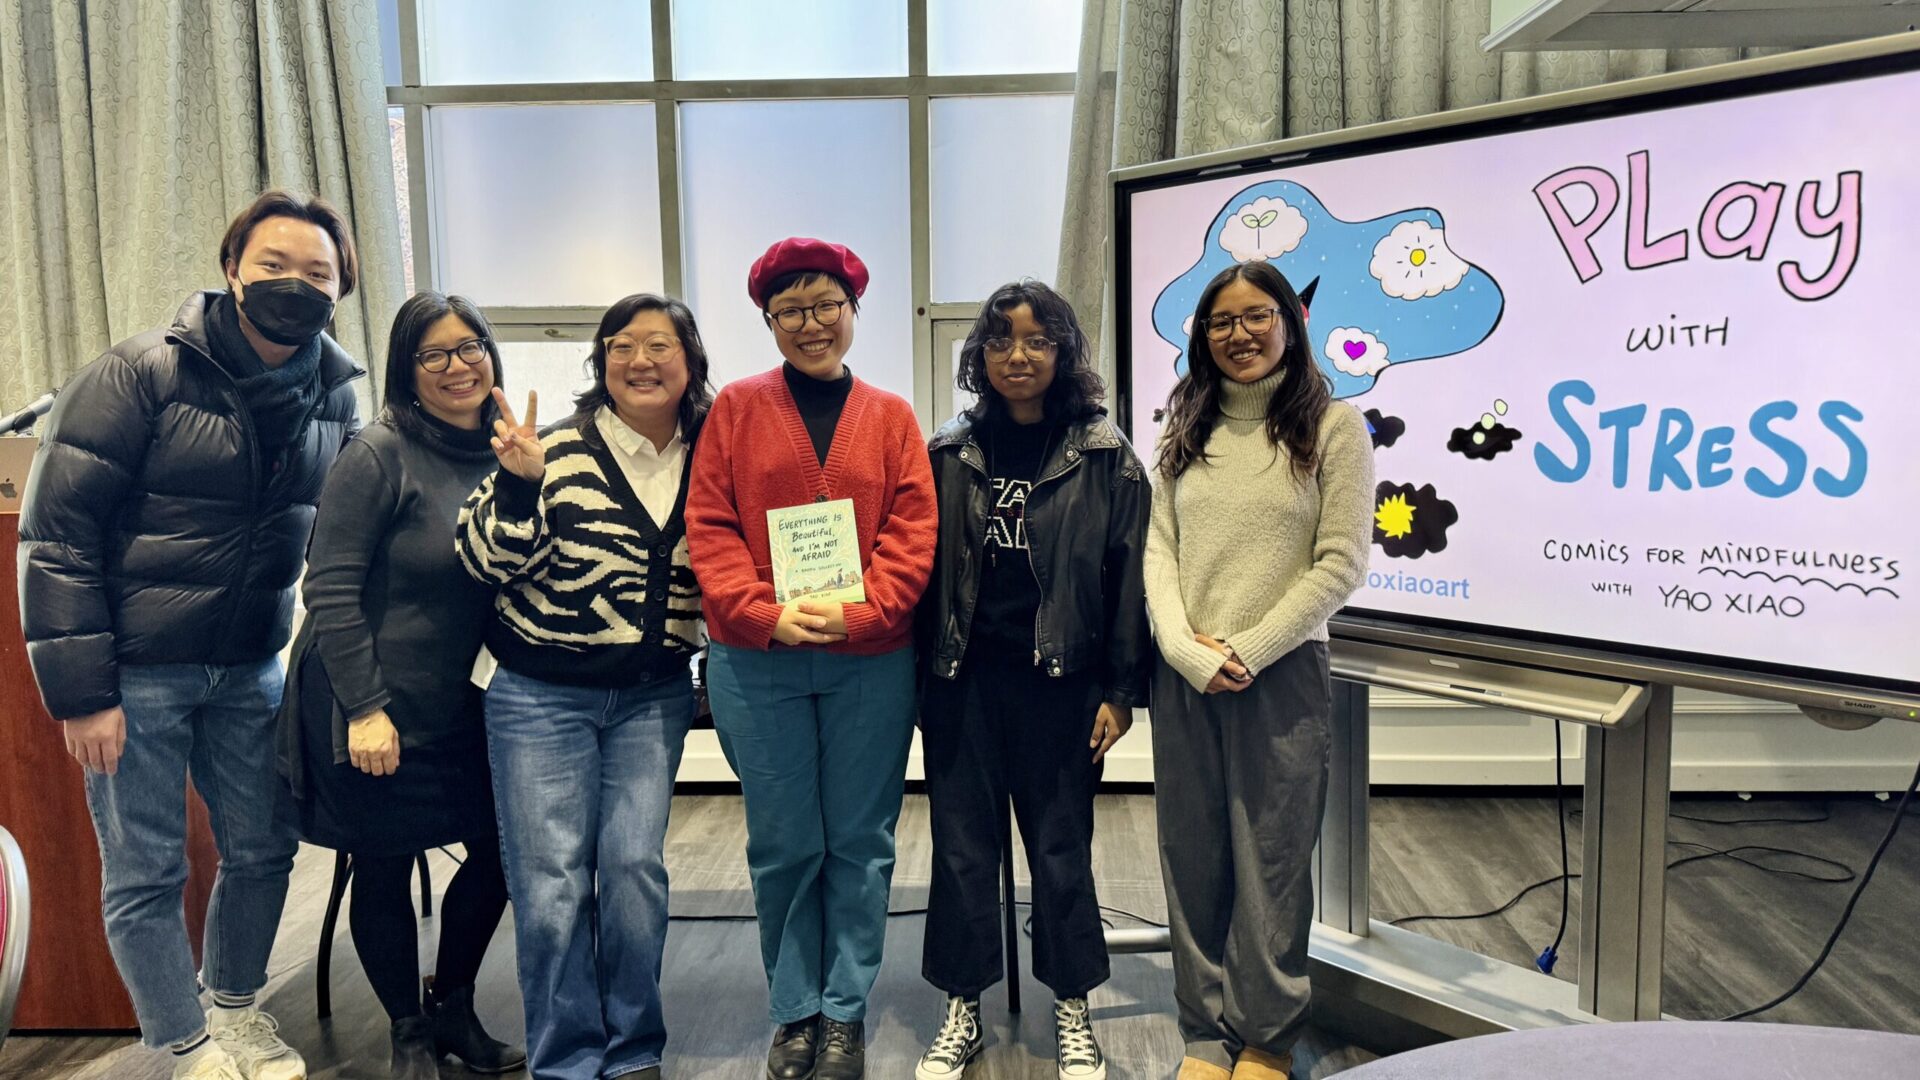 QCAP Team members (left to right) Ray, Amy, Caroline, Sal, and Annabelle with artist Yao Xiao at a Fall 2023 QCAP Mental Health Workshop